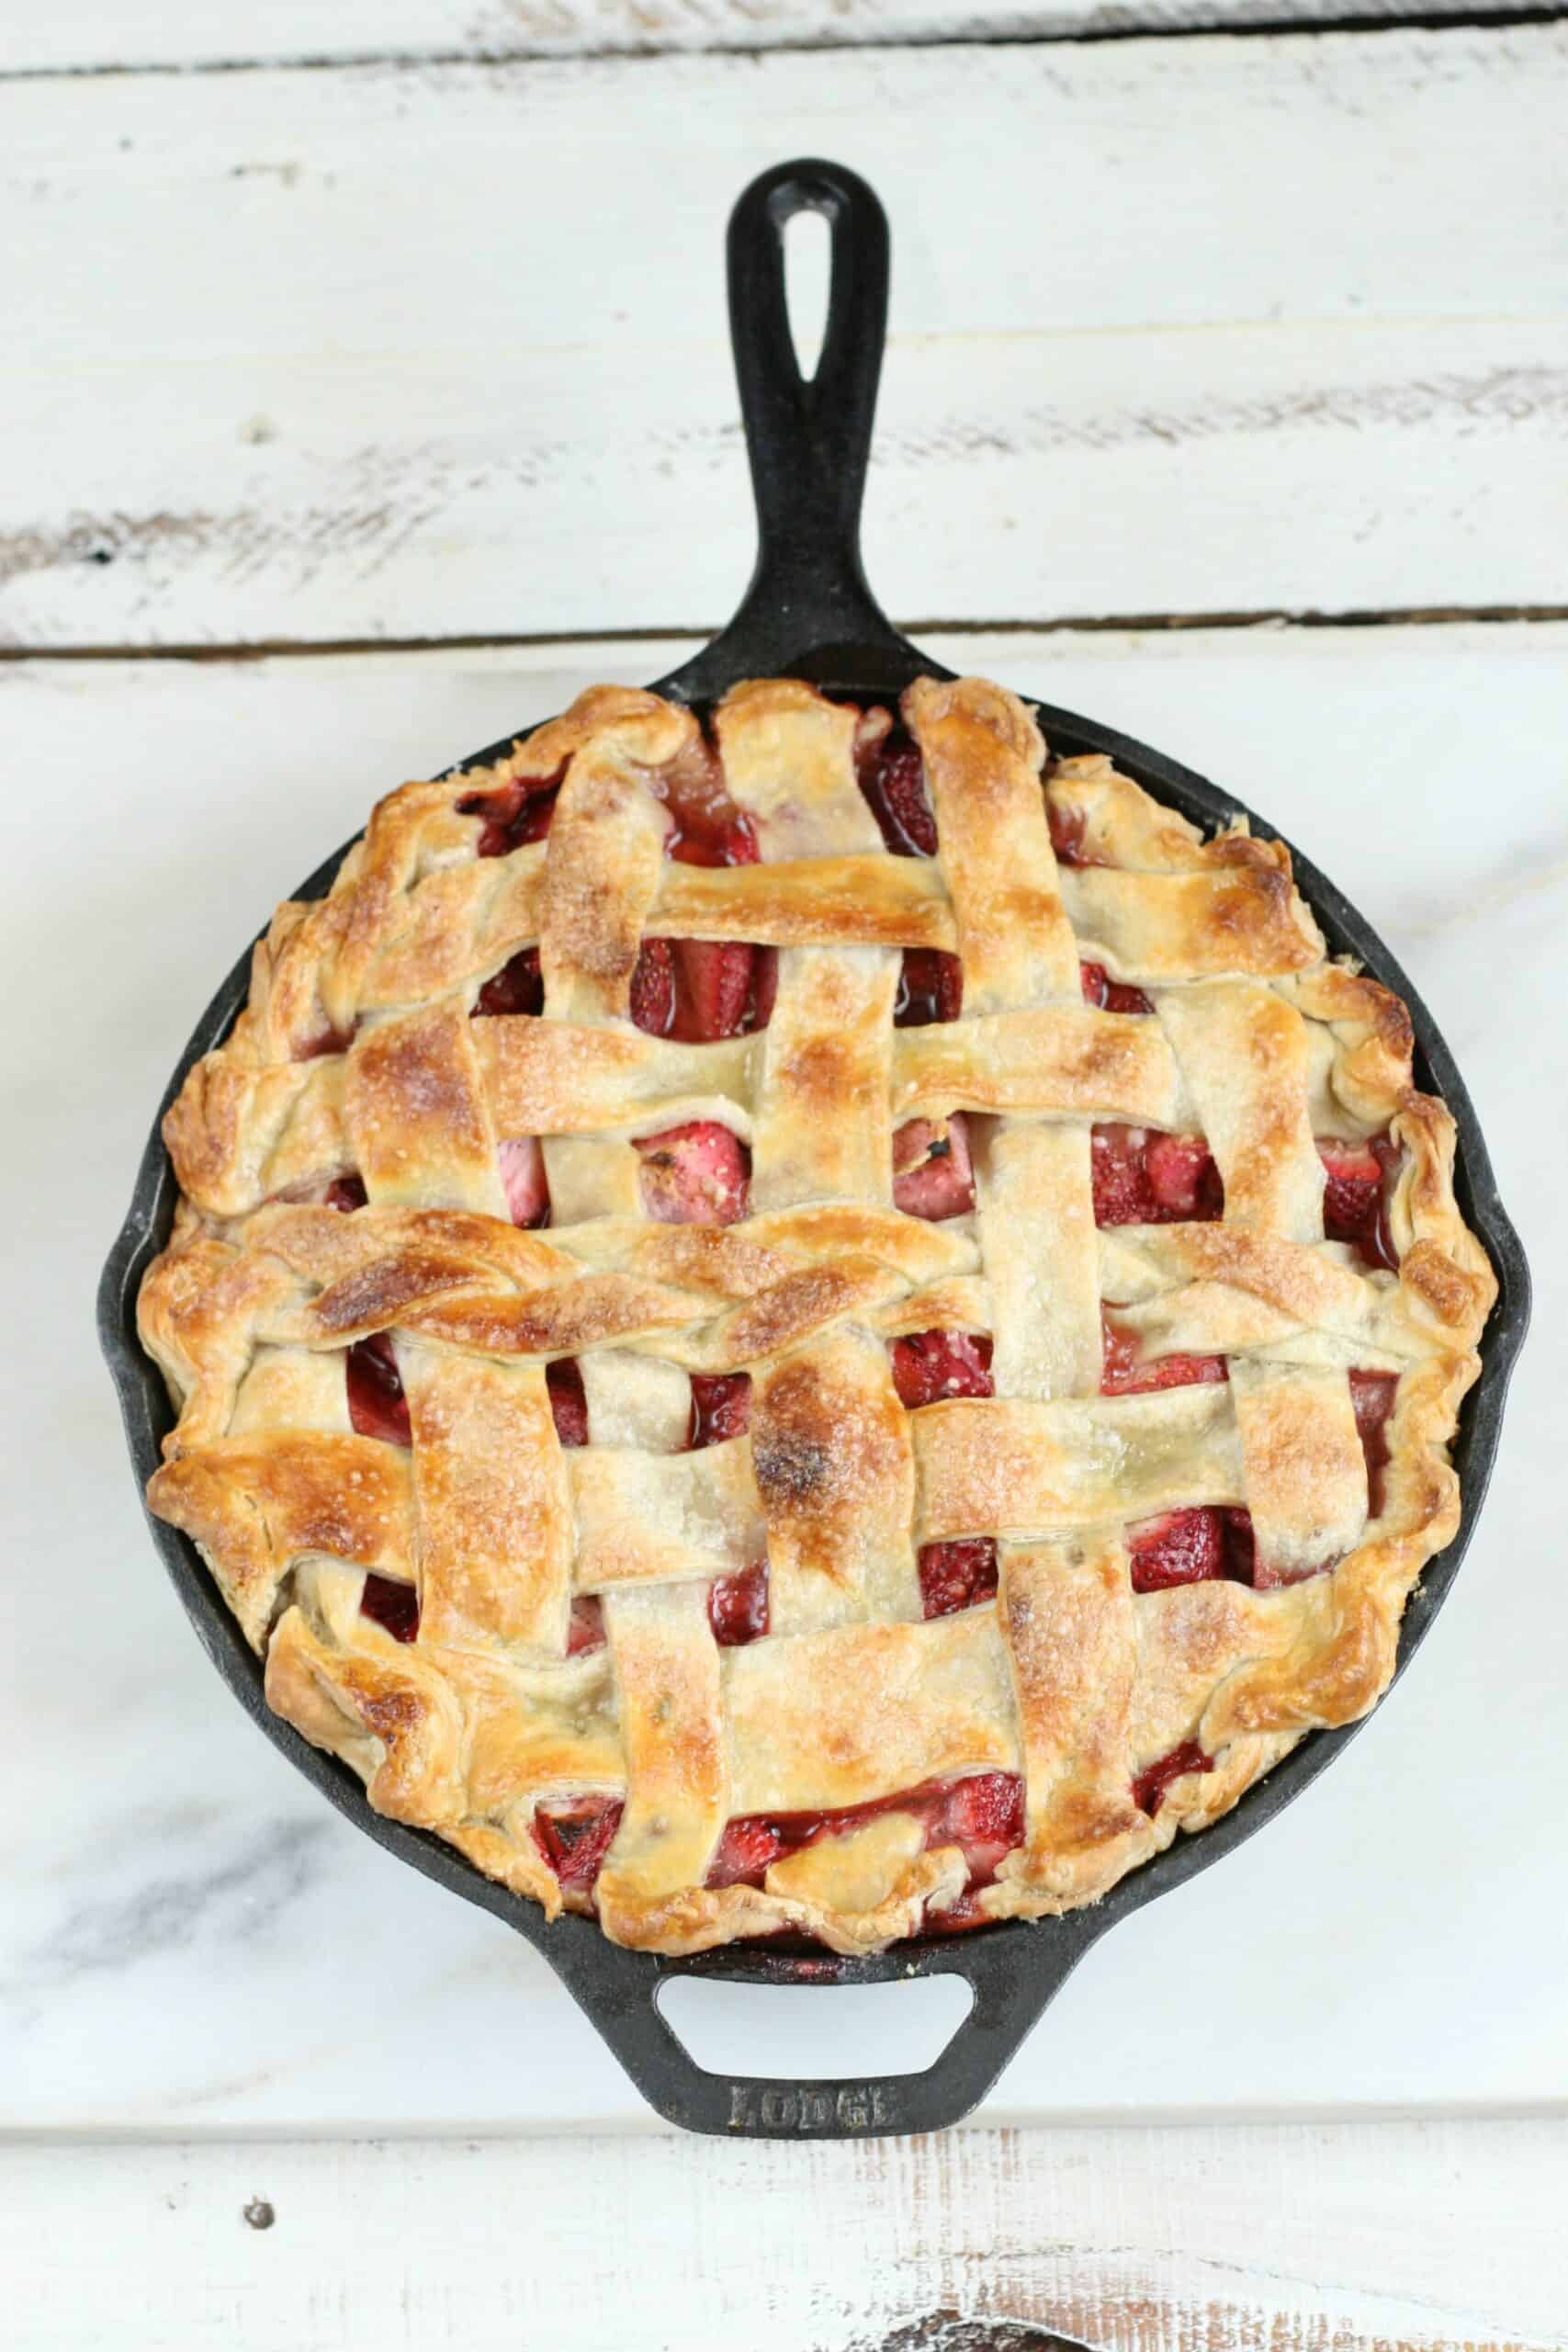 strawberry pie with lattice crust in a cast iron pan.